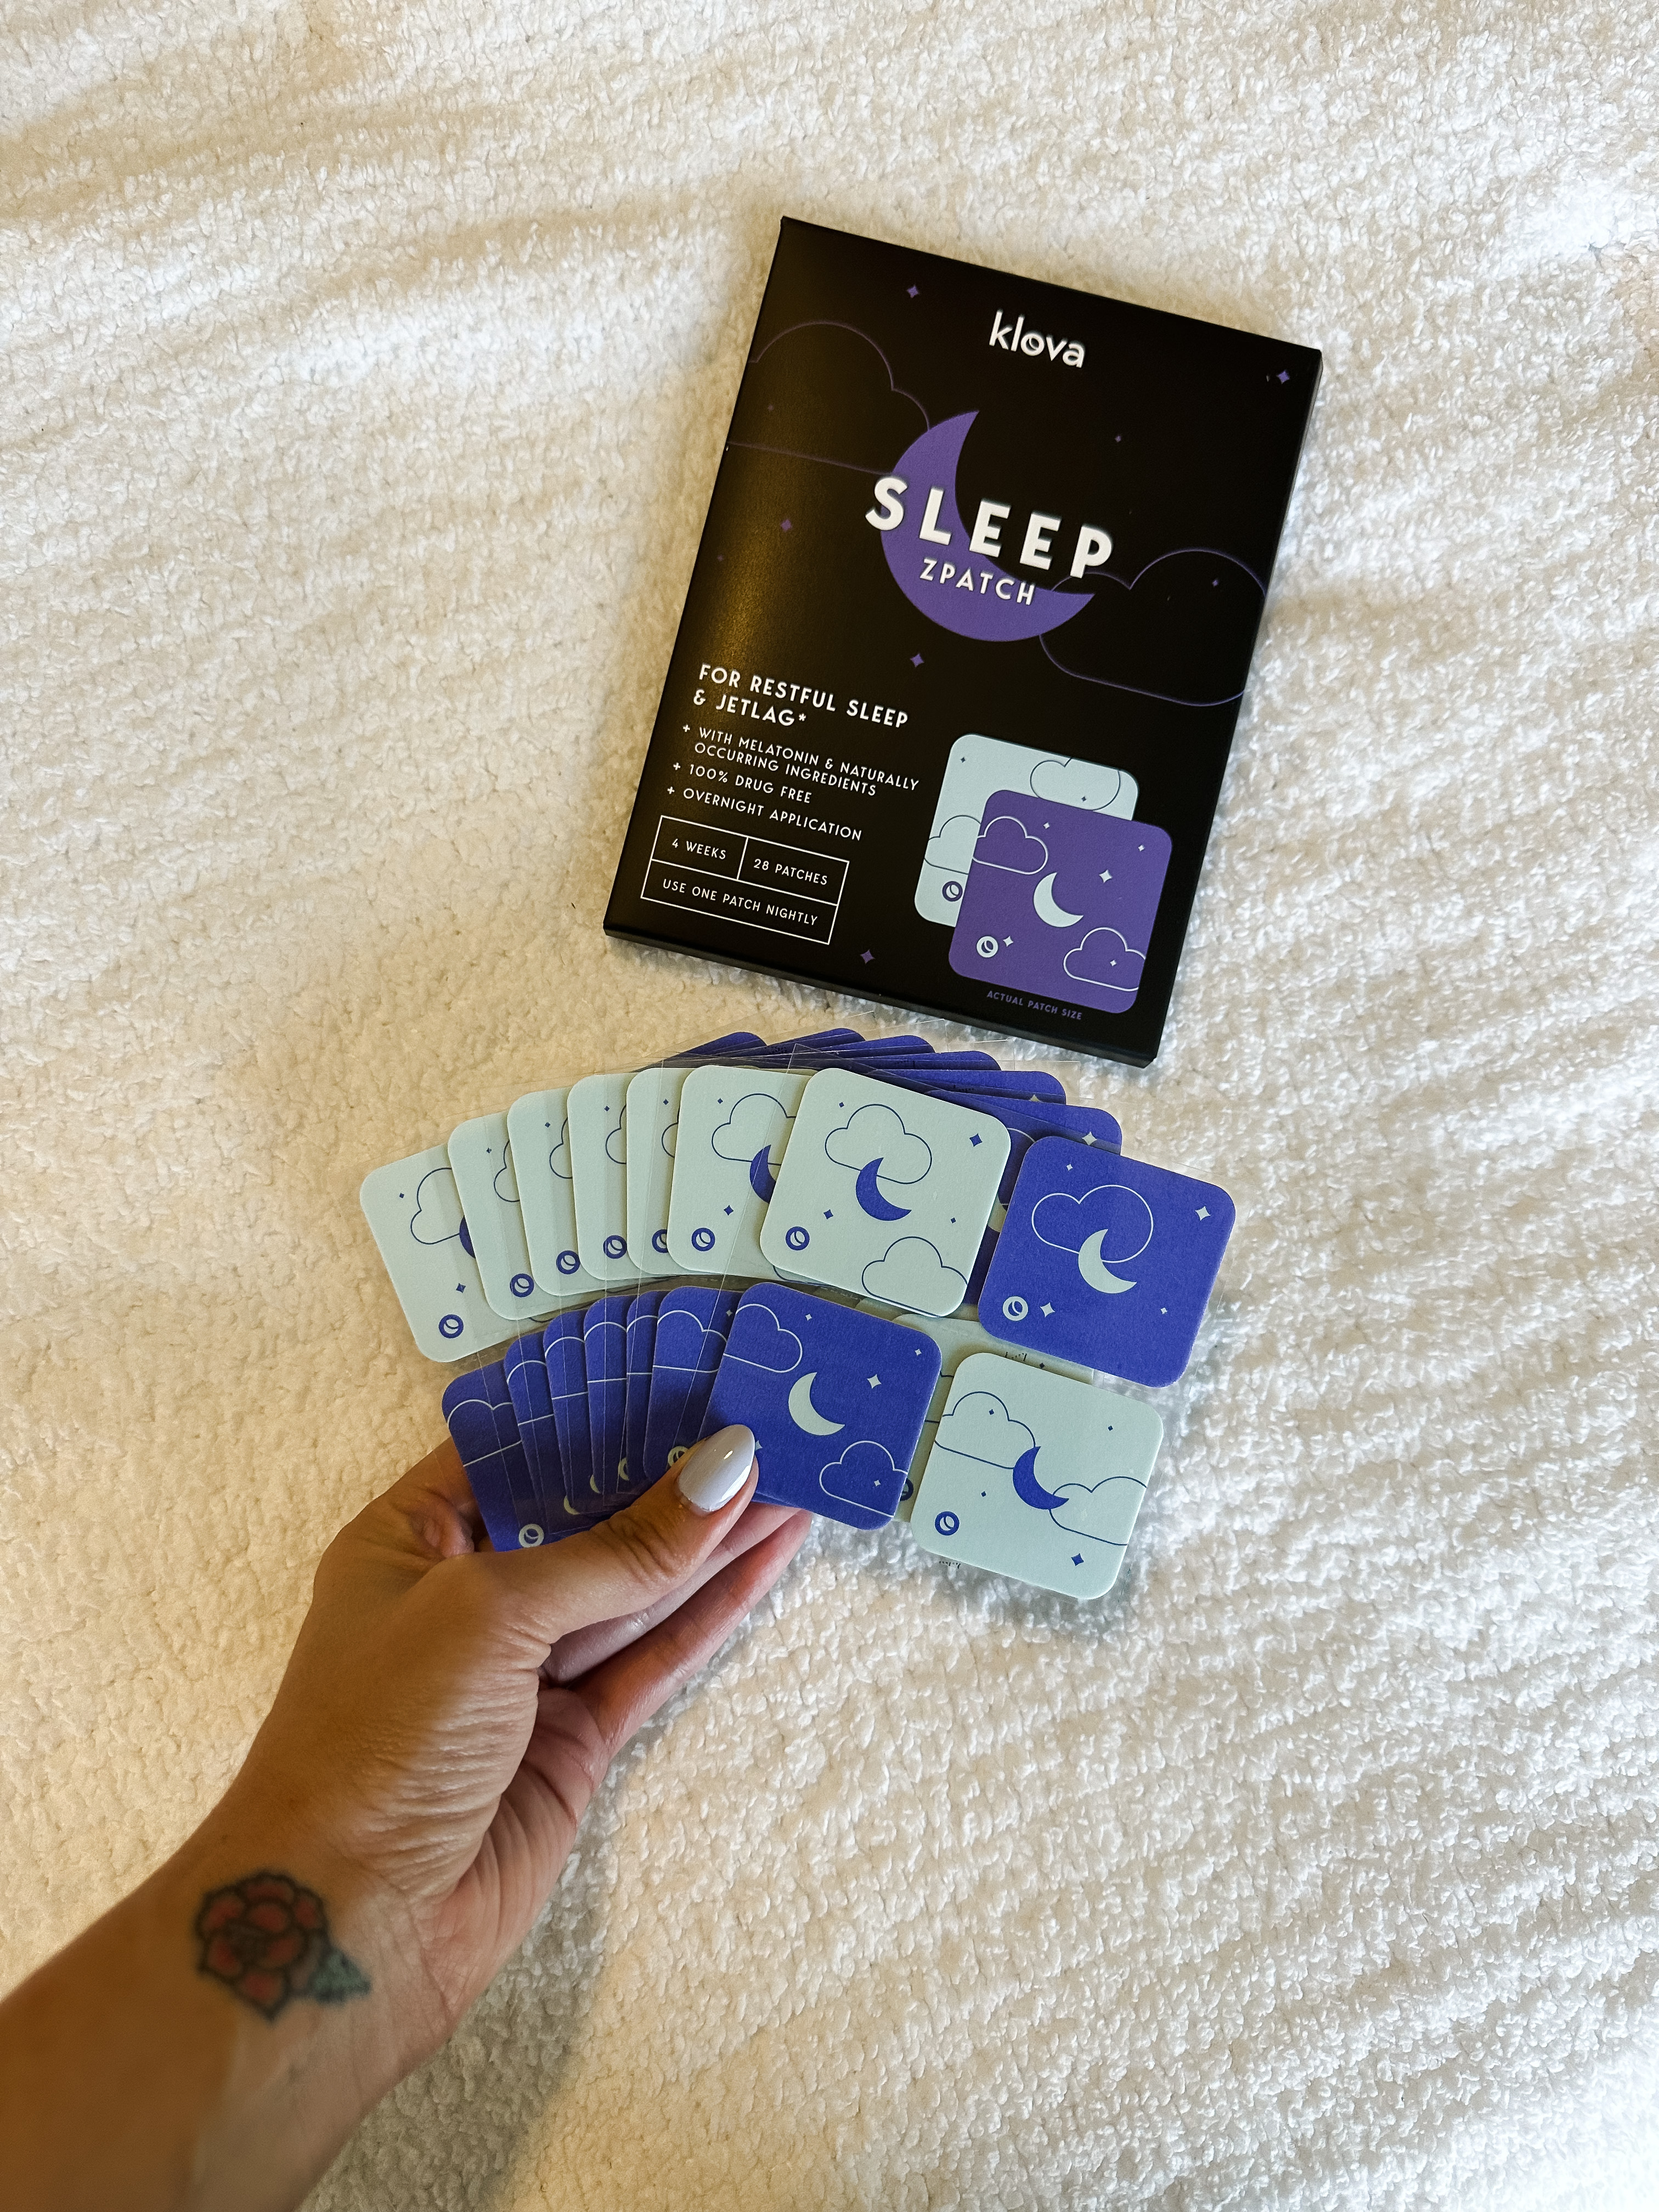 I Wasn’t Sure This Sleep Patch Would Really Work–Here’s What Happened When I Tried It